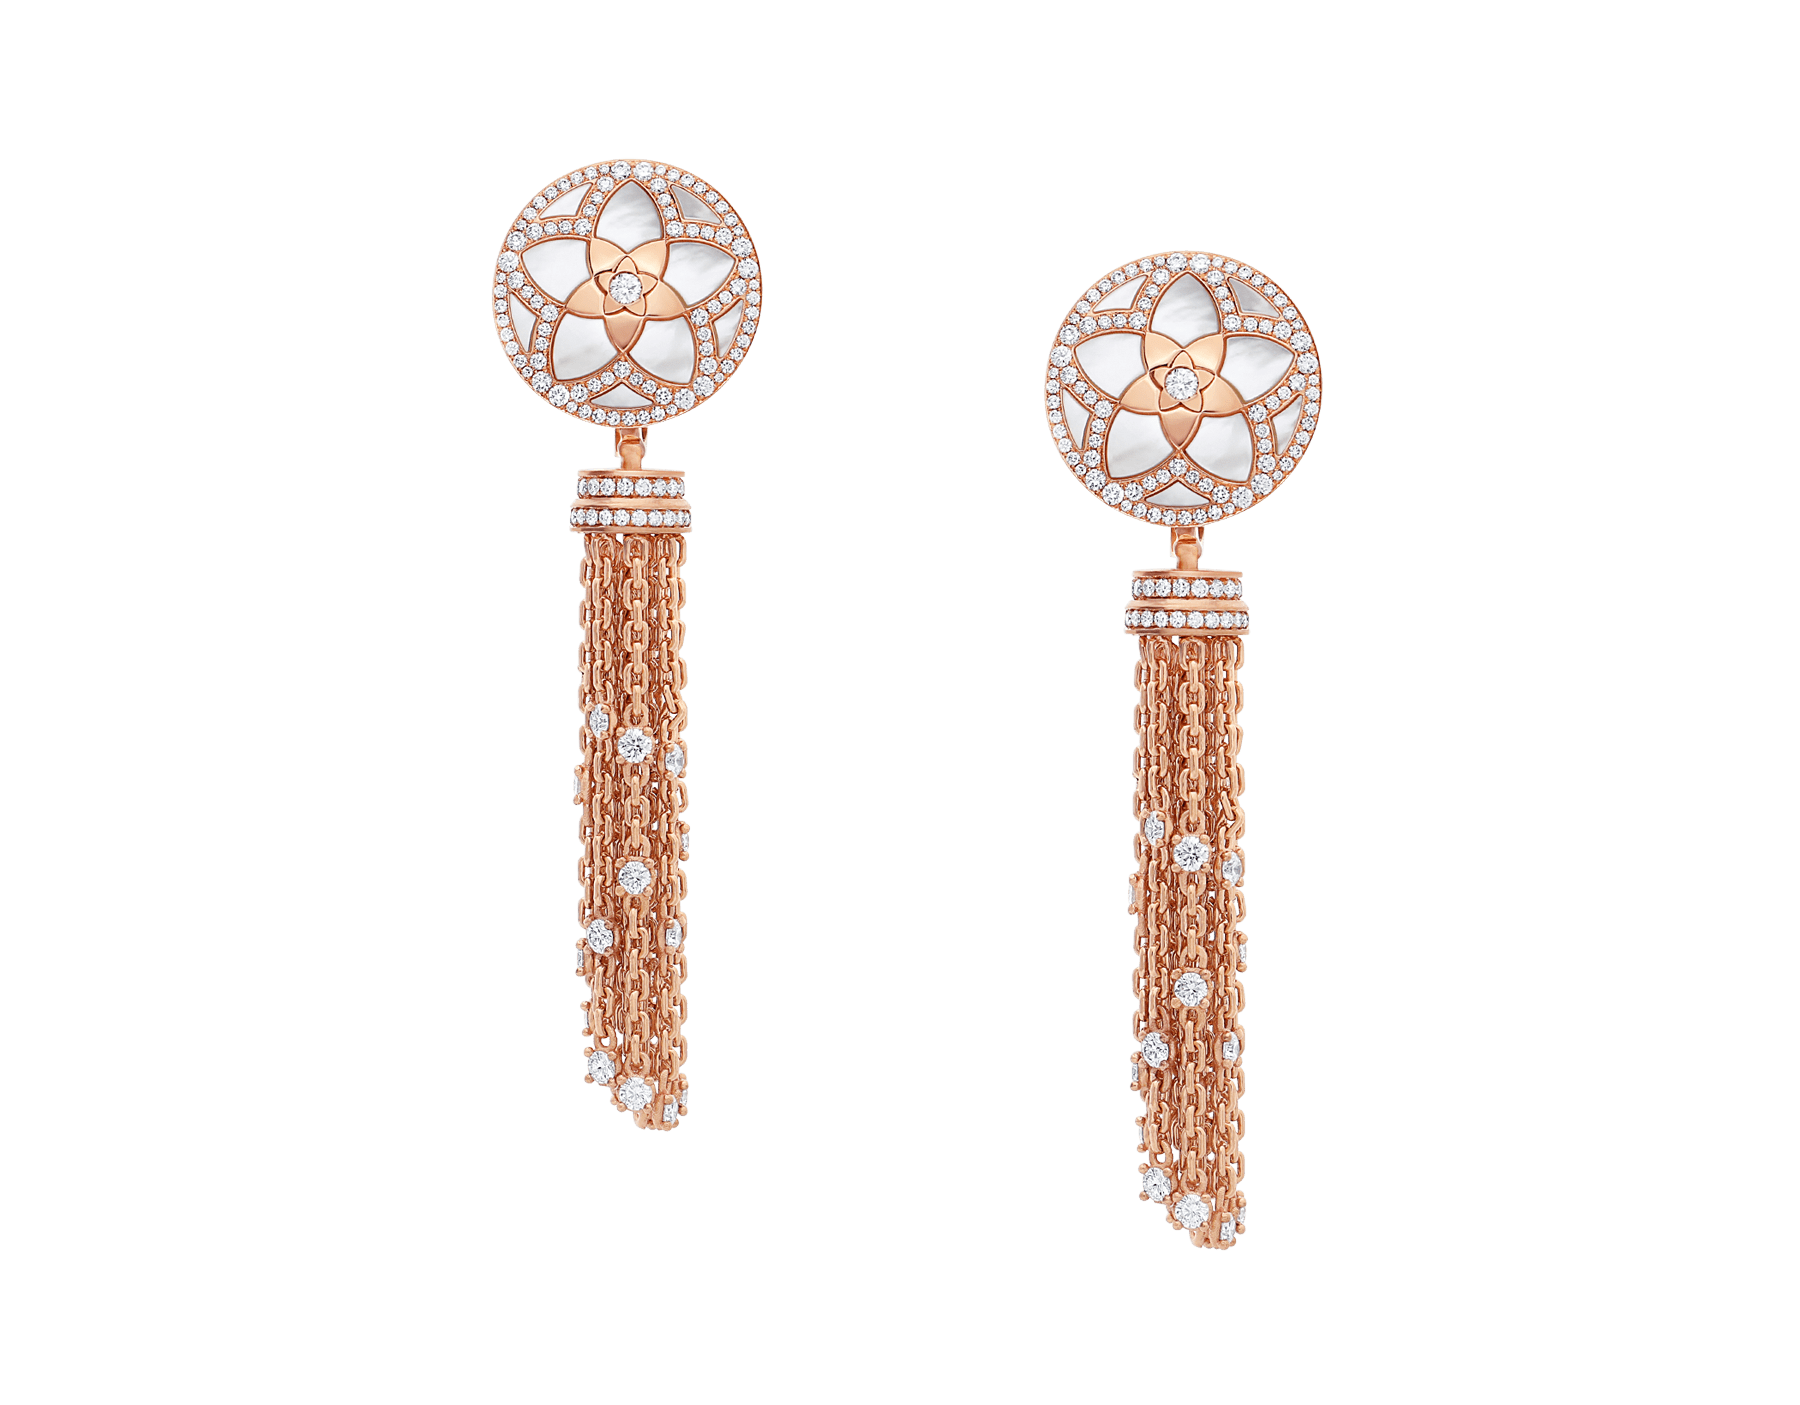 Jannah Flower 18 kt rose gold earrings set with mother-of-pearl inserts and pavé diamonds, and with an 18 kt rose gold and pavé diamond tassel 358488 image 1